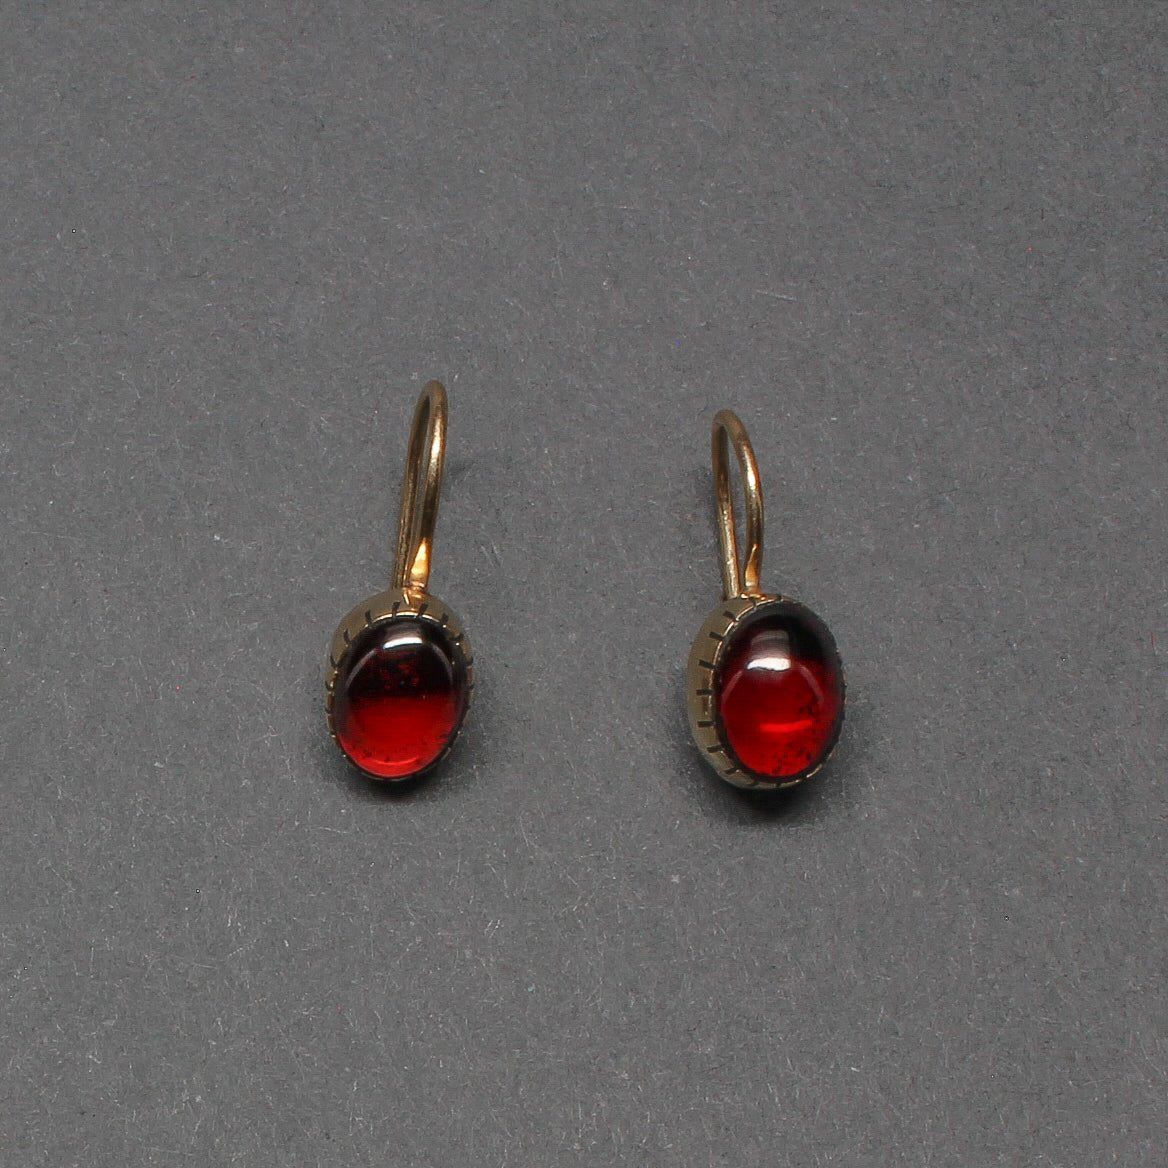 Small Yazzie Johnson Earrings of 14kt Gold Drops With Garnets - Turquoise & Tufa